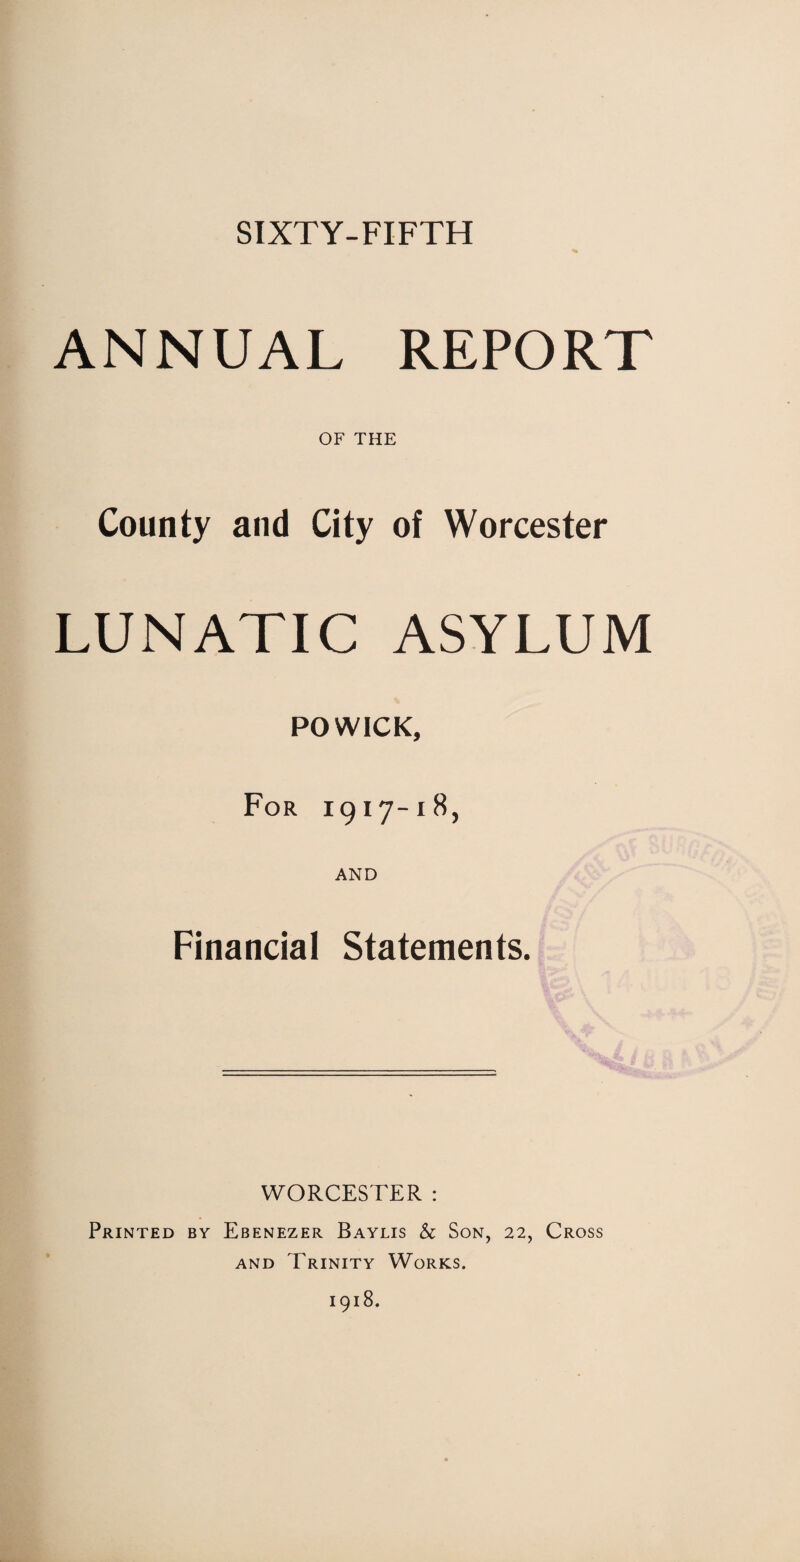 SIXTY-FIFTH ANNUAL REPORT OF THE County and City of Worcester LUNATIC ASYLUM POWICK, For 1917-18, AND Financial Statements. WORCESTER : Printed by Ebenezer Baylis & Son, 22, Cross and Trinity Works. 1918.